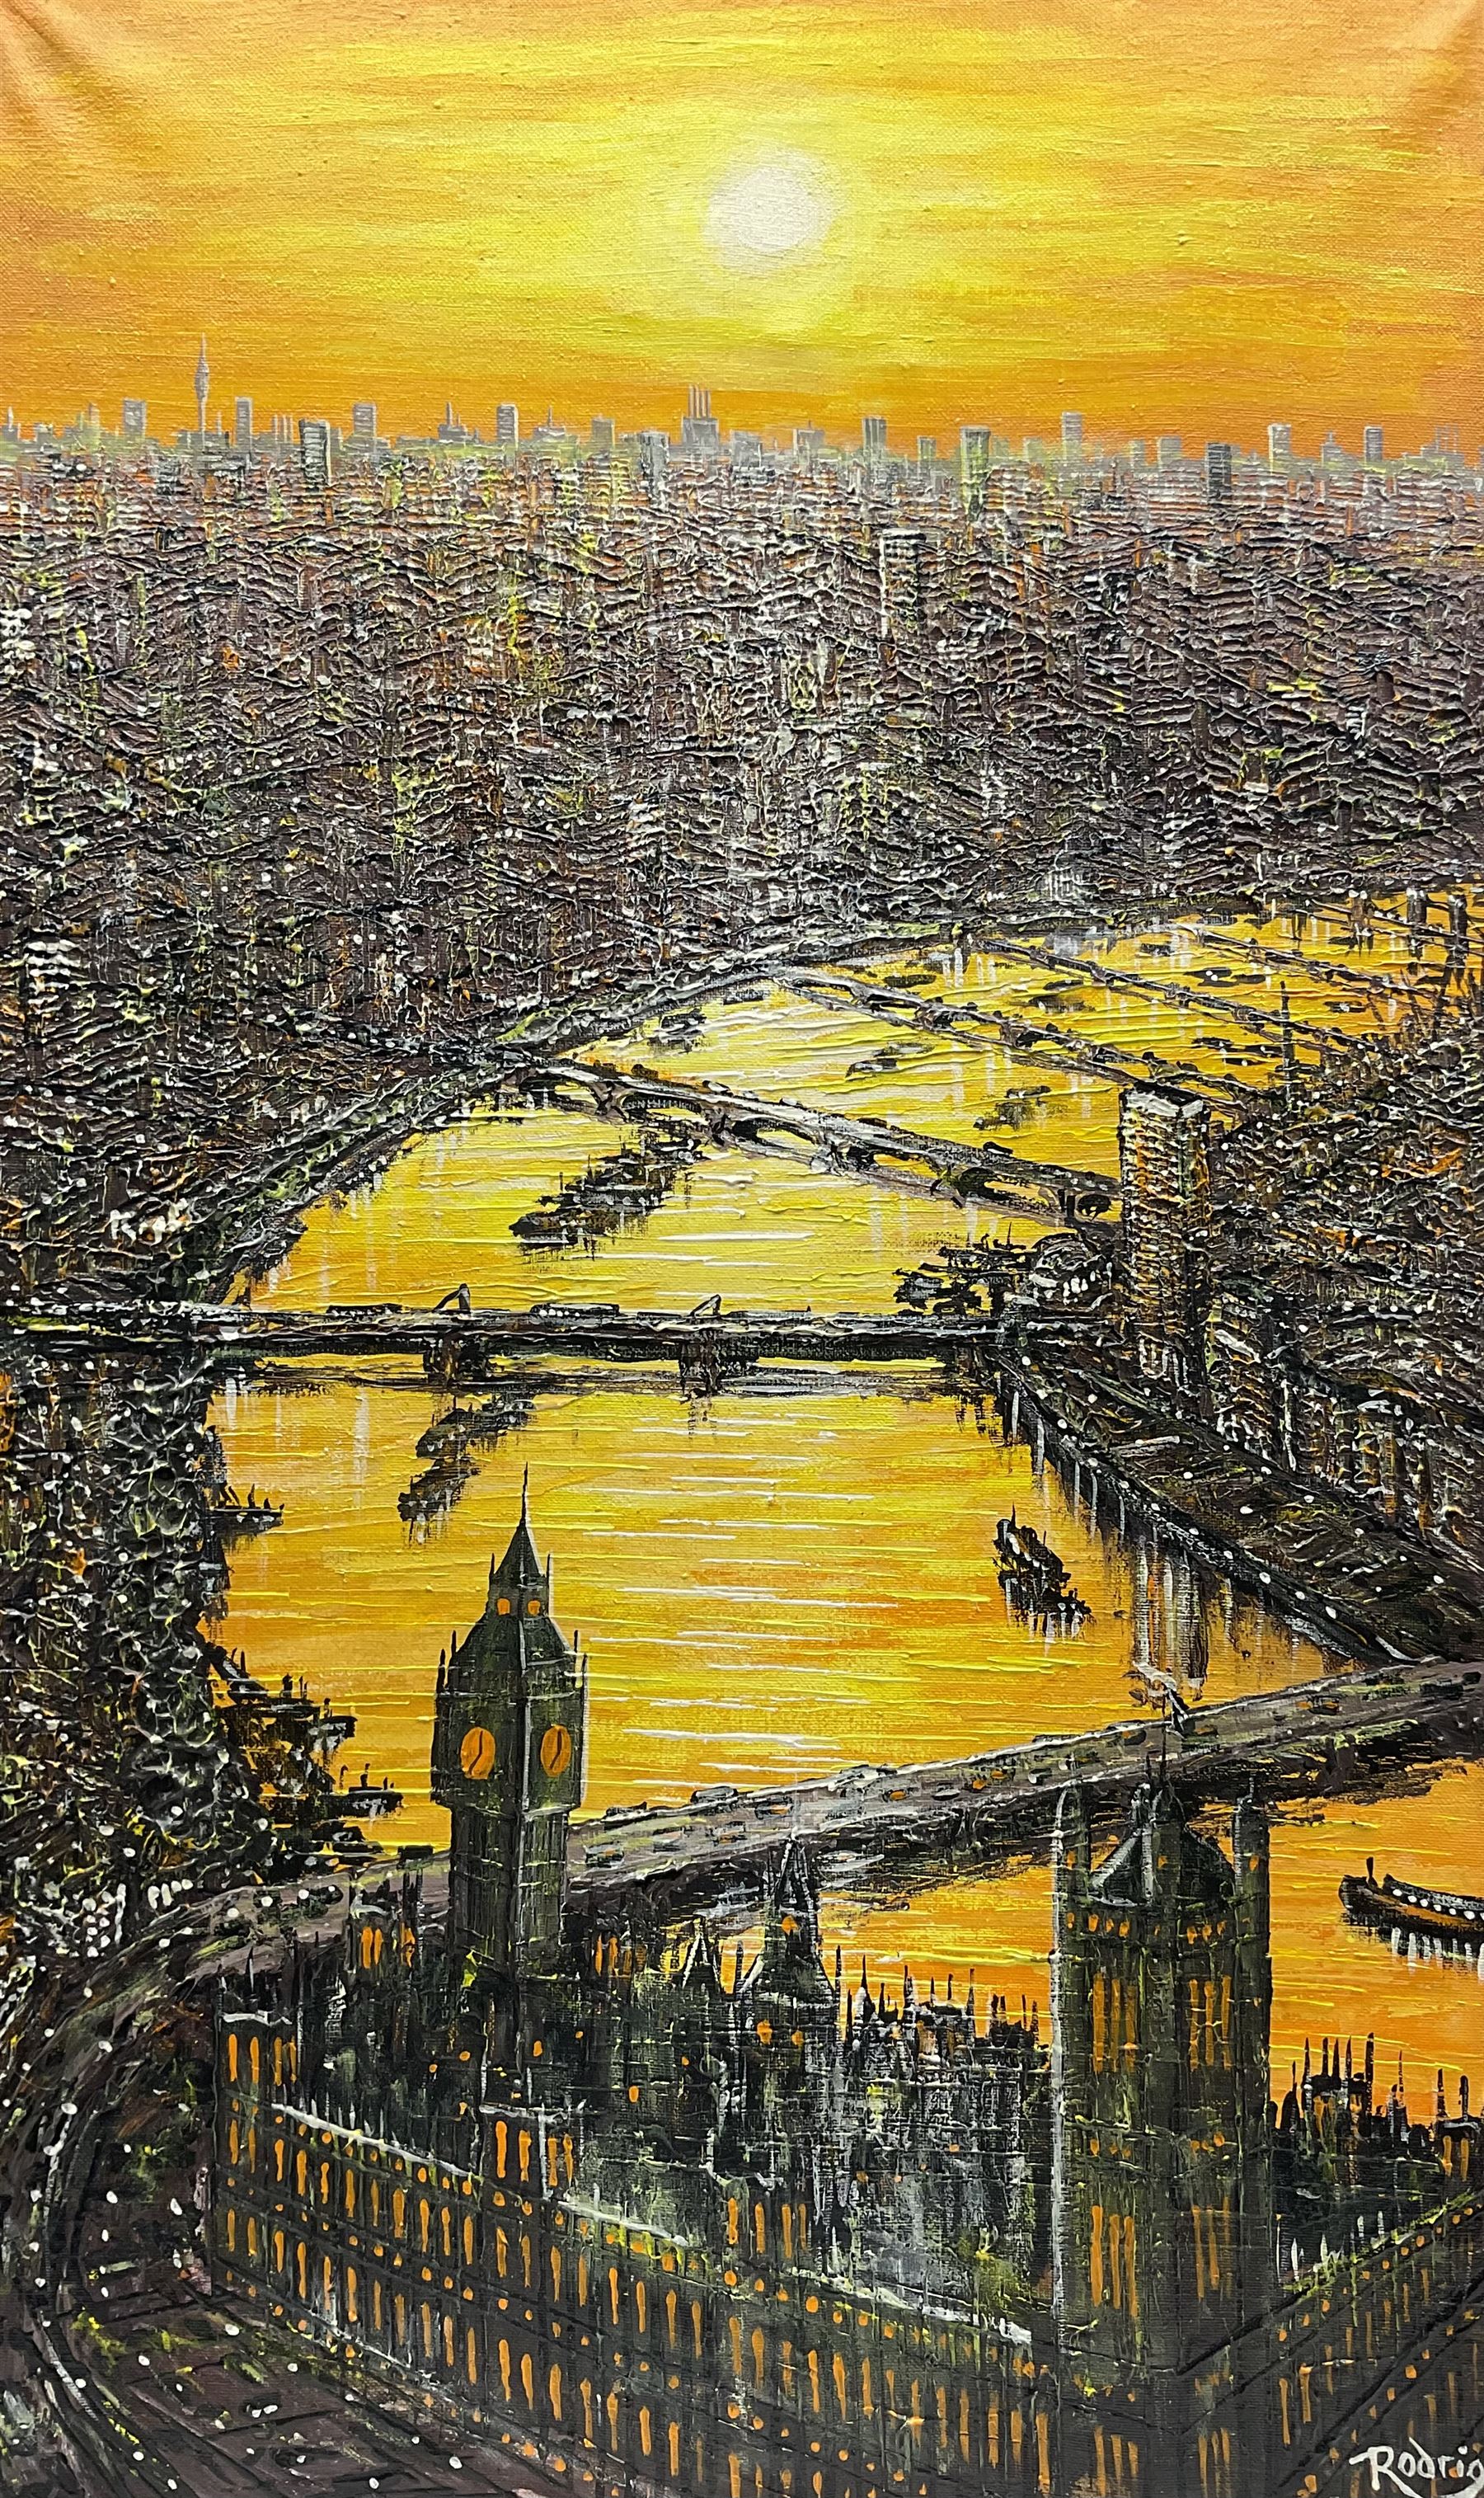 Alvaro Rodriguez (Spanish Contemporary): Aerial View of the Thames at London